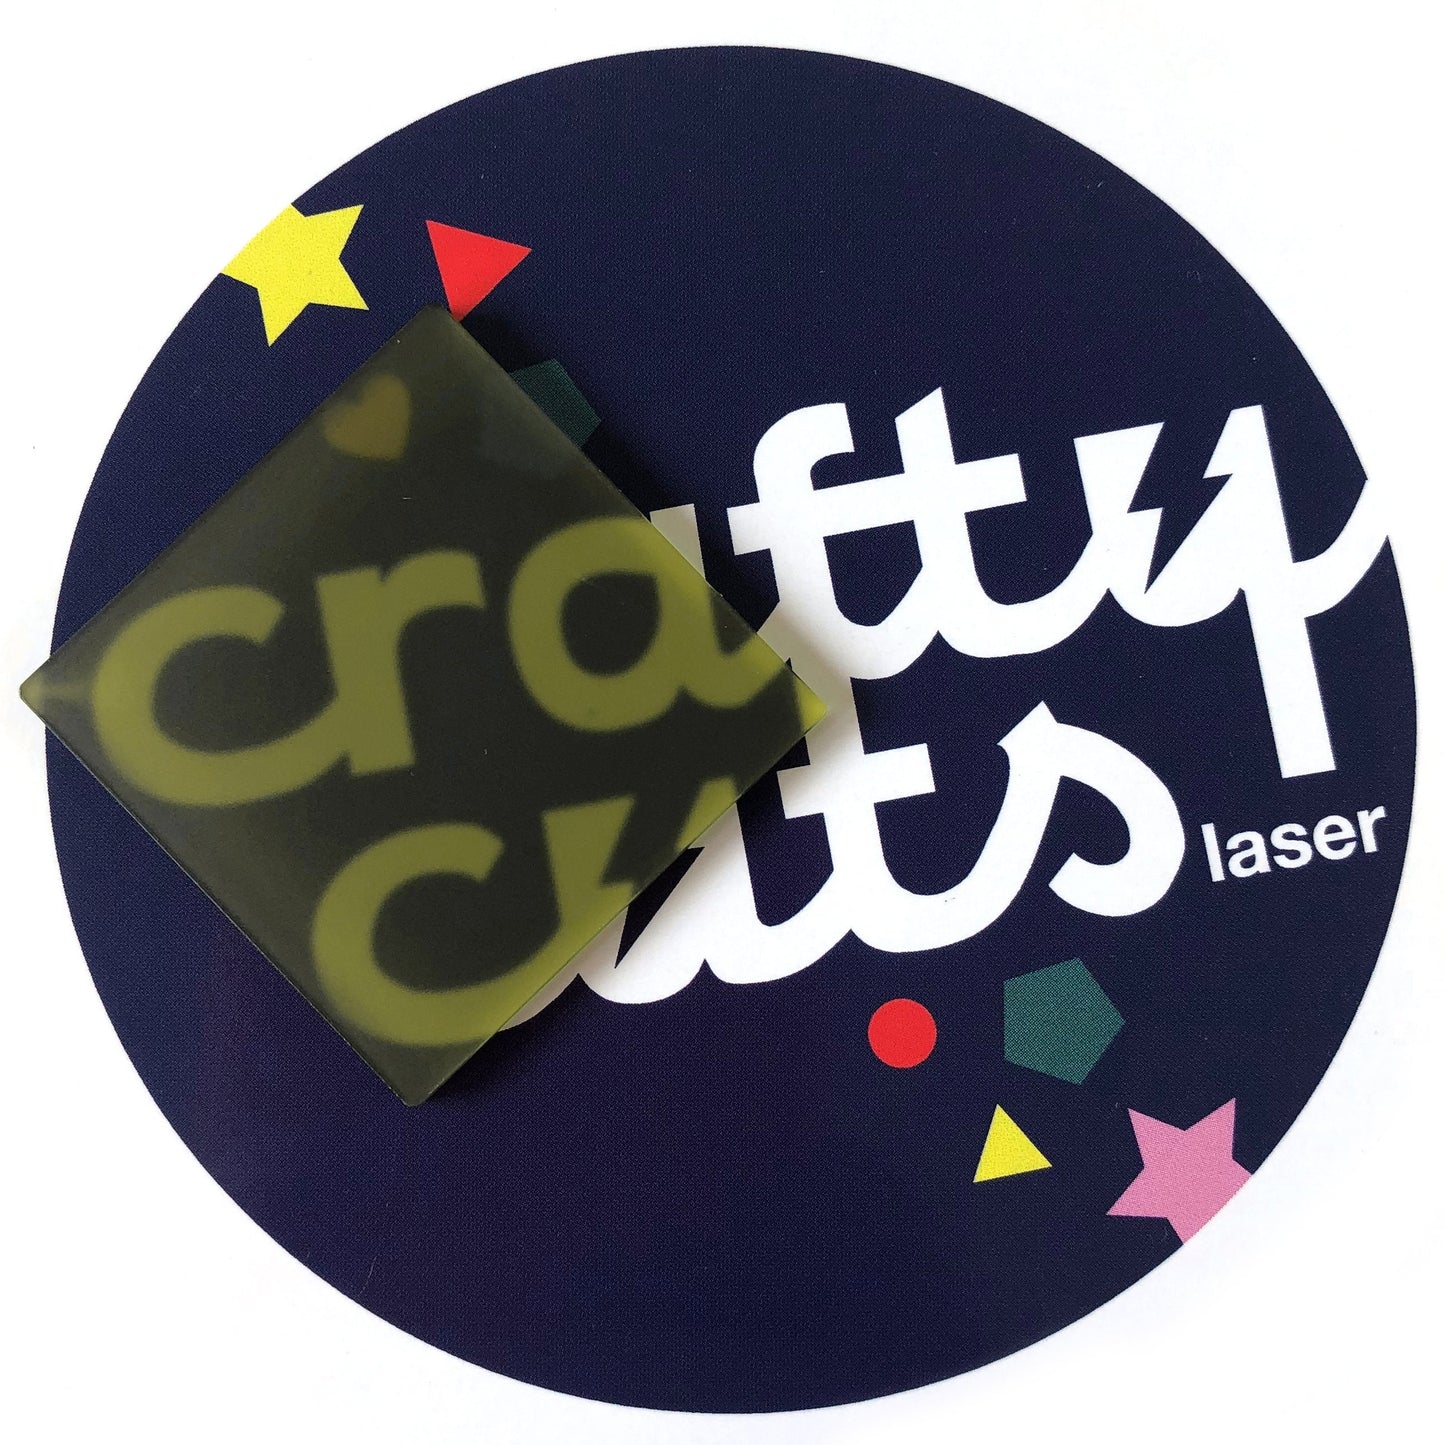 Crafty Cuts Laser Pty Ltd Materials Frosted Acrylic - Moss